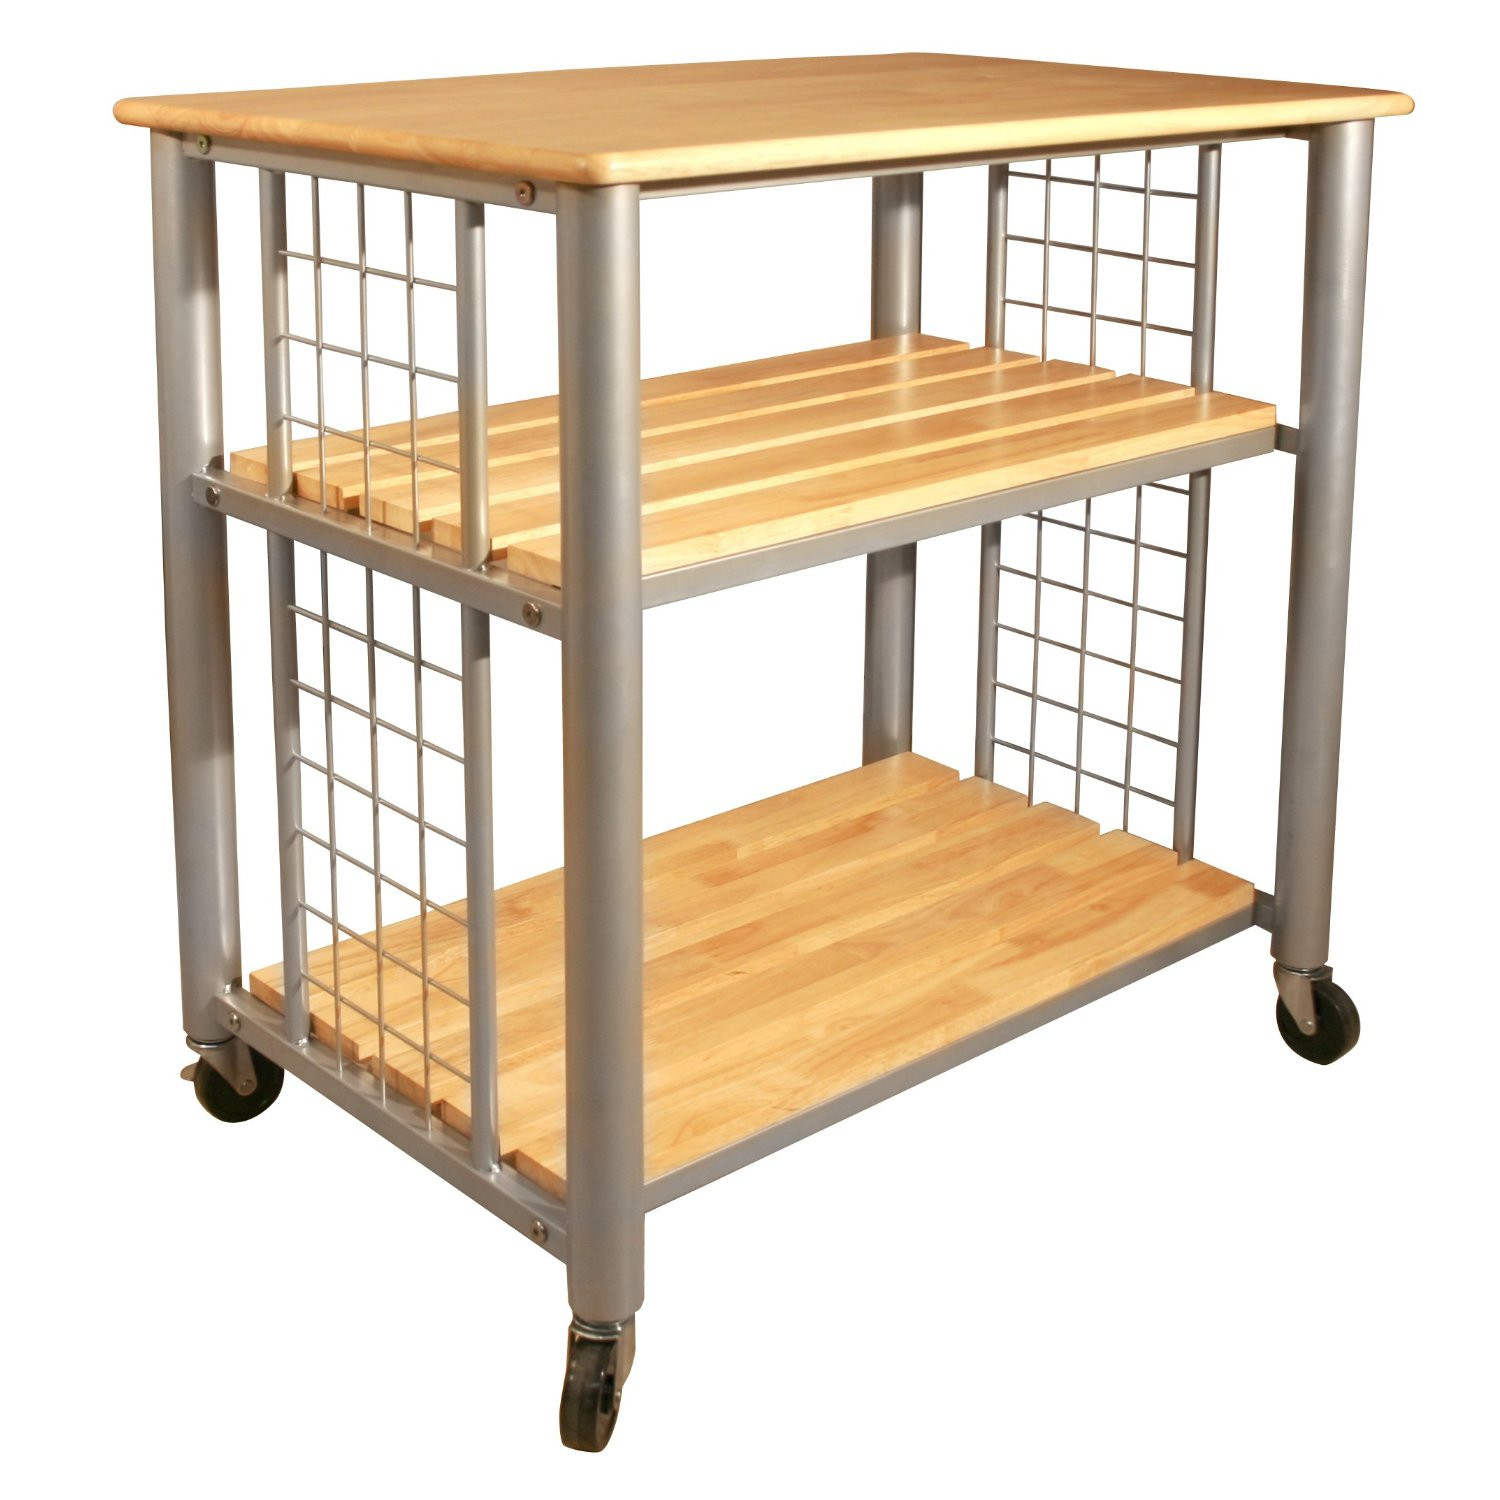 Small Rolling Kitchen Cart
 Best Rolling Kitchen Cart Options